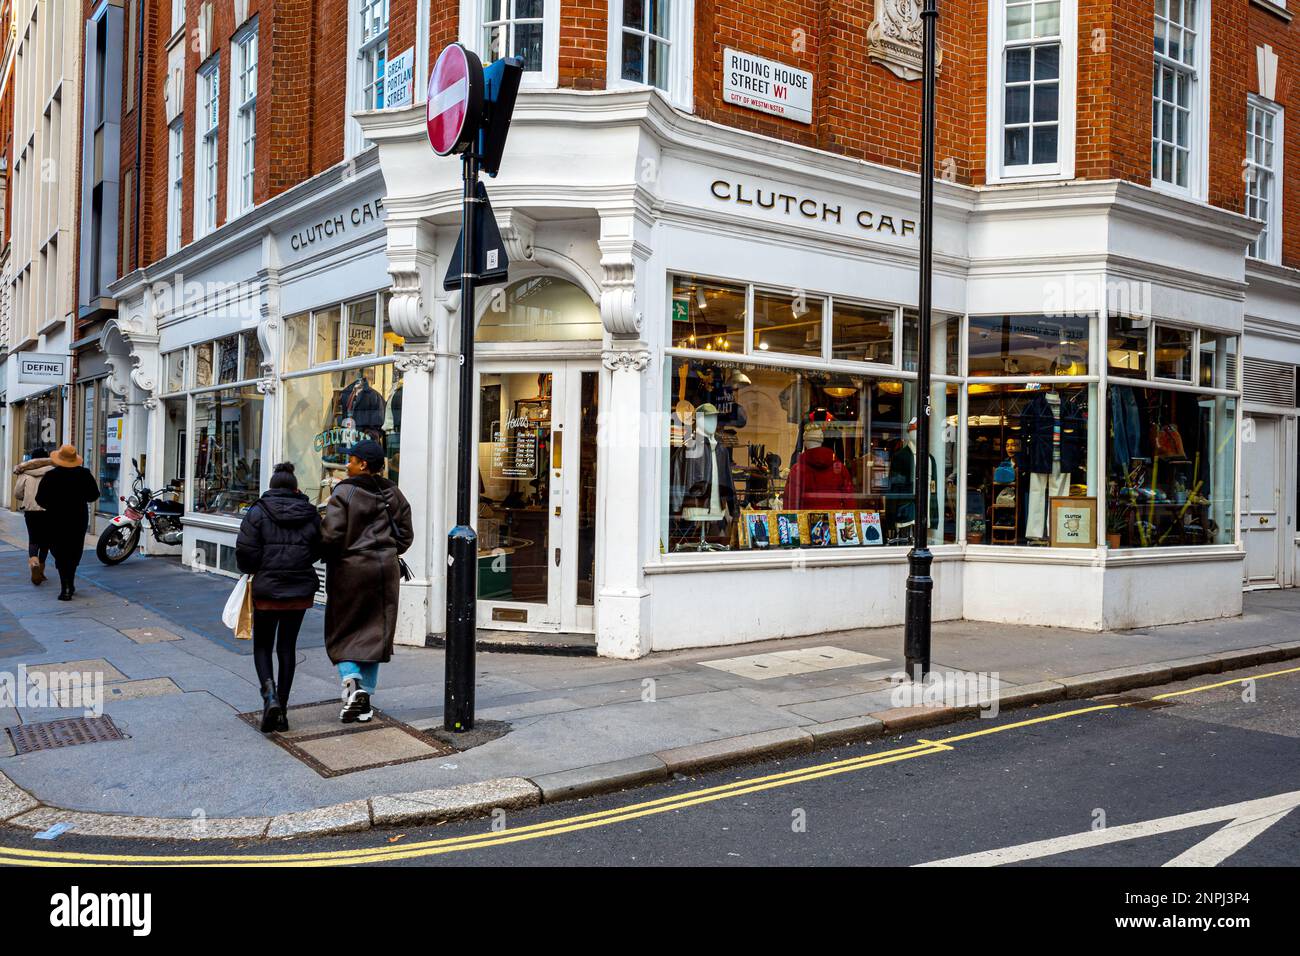 Clutch Cafe London - Clutch Cafe 78 Great Portland St London sells a selection of Japanese heritage clothing, lifestyle publications & accessories. Stock Photo